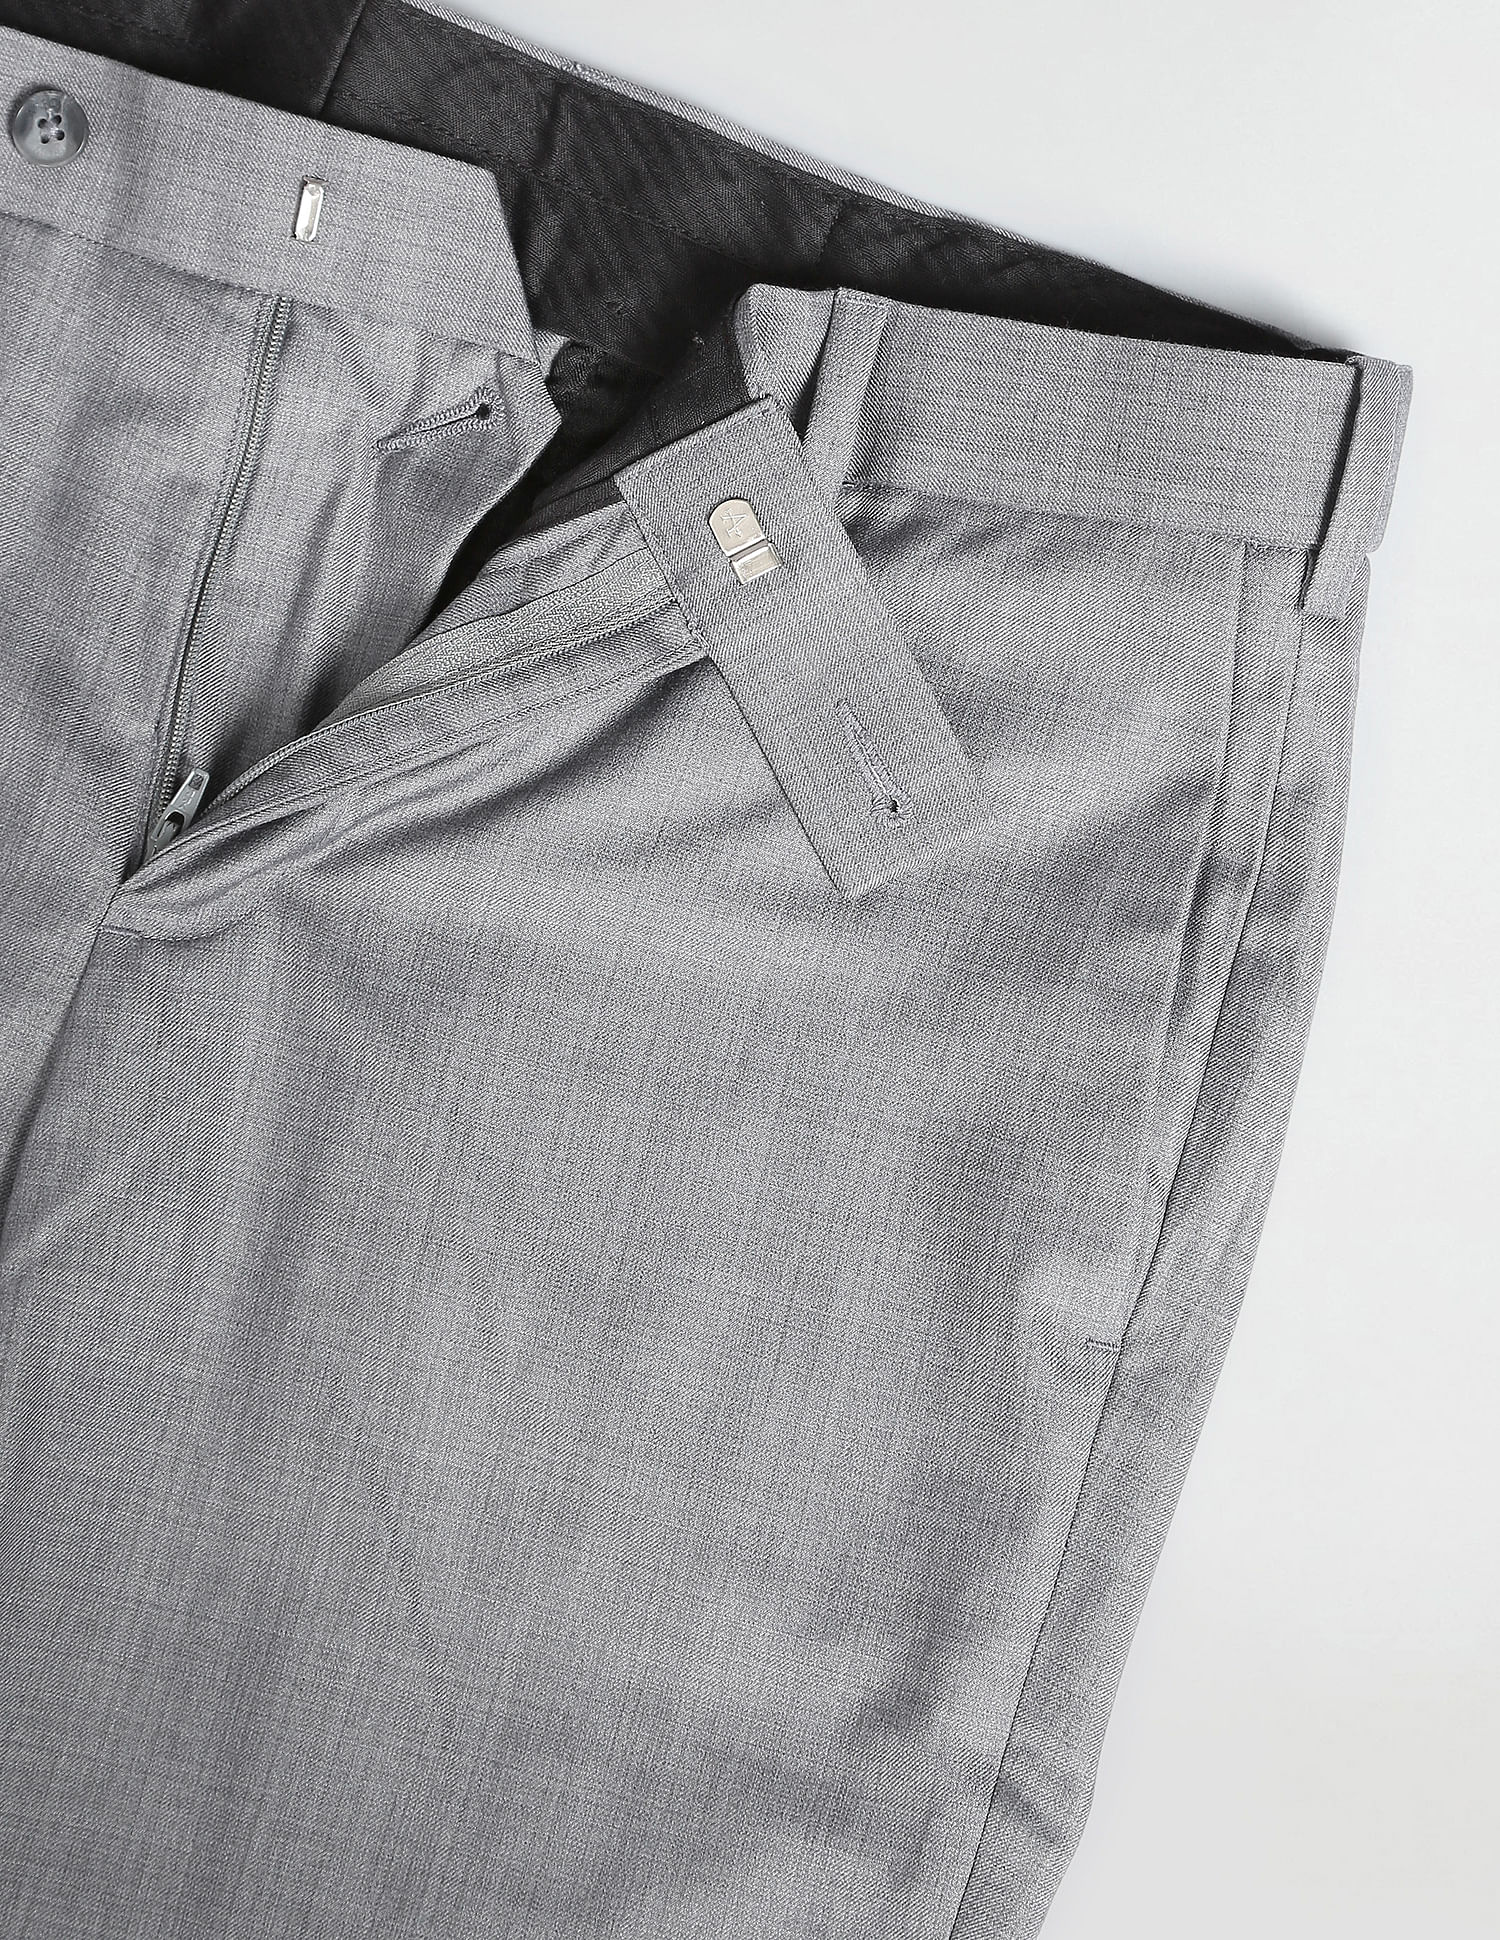 Stretch Twill Utility Pant– Purnell